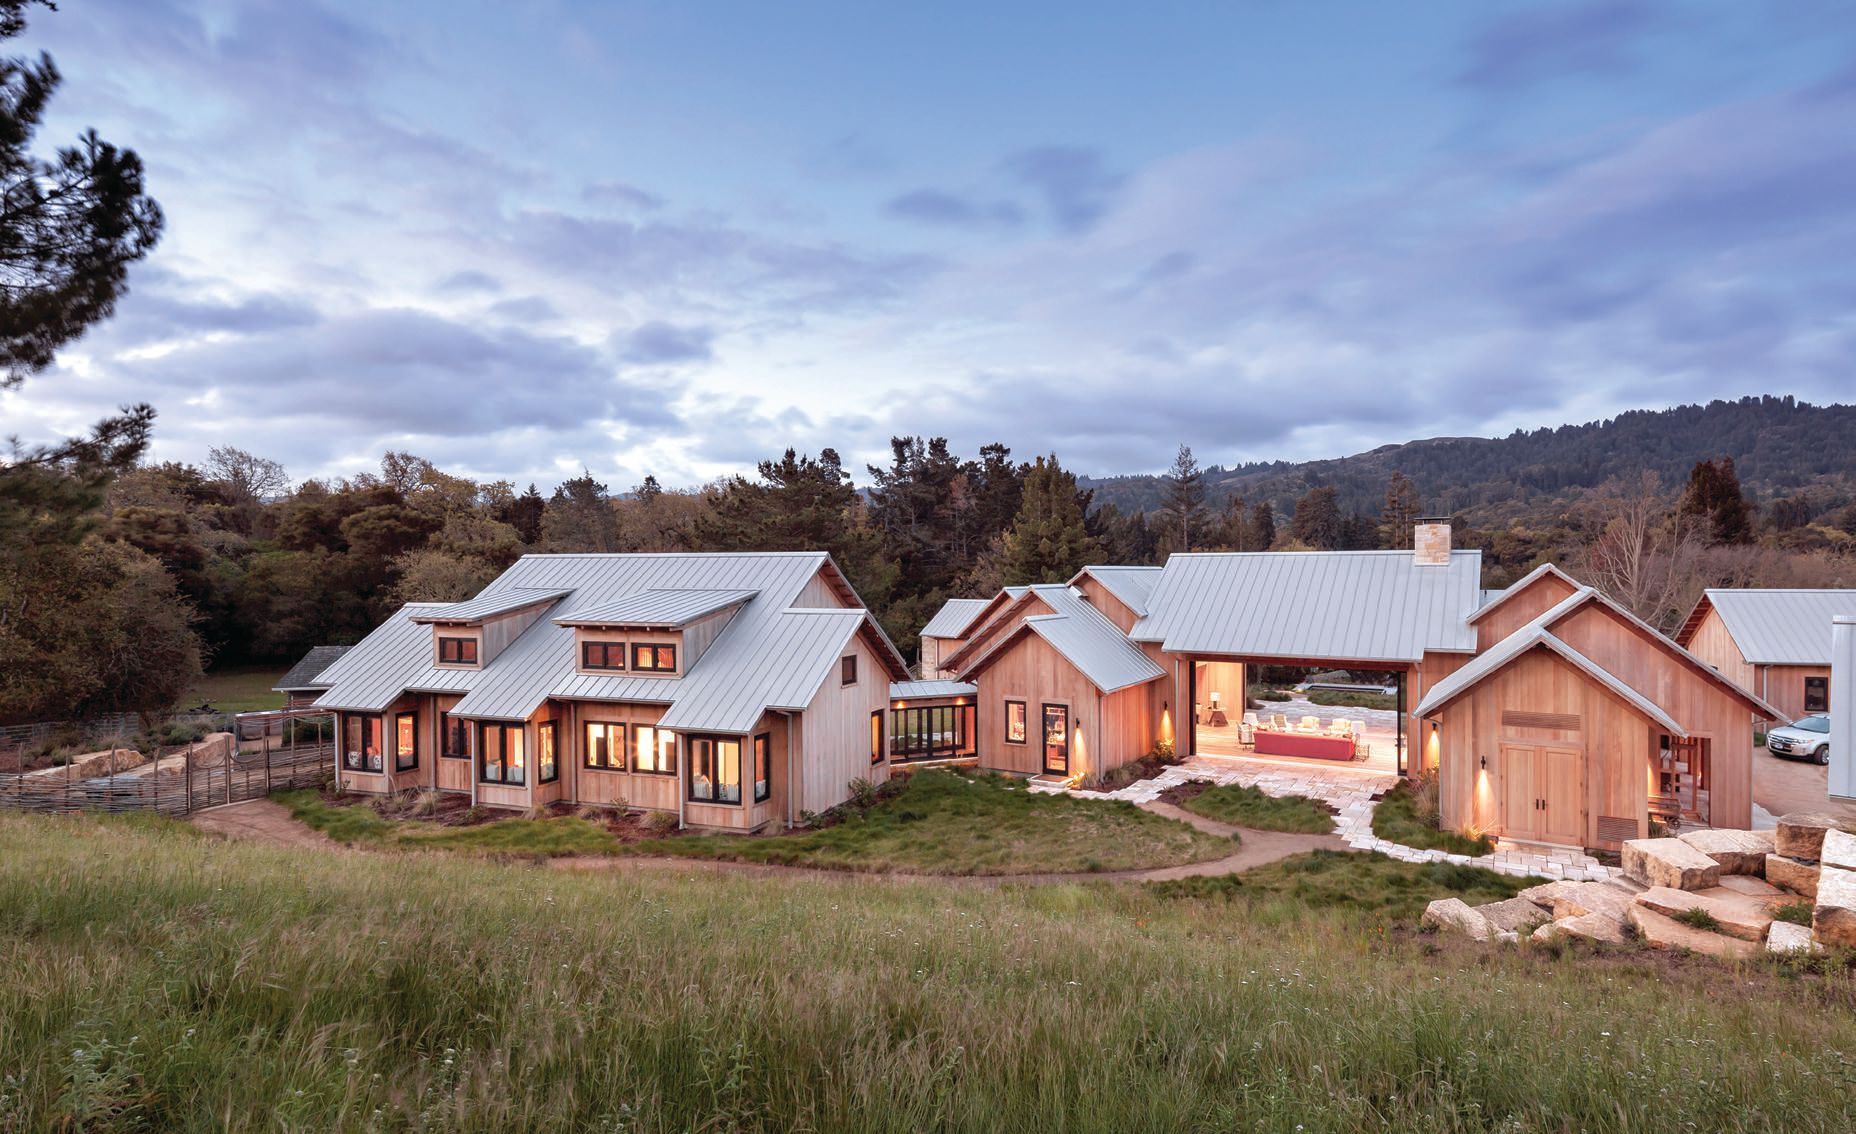 Yates and her husband, Paul Holland, built one of the most sustainable homes in the United States, Tah. Mah. Lah., right here in Silicon Valley. PHOTO COURTESY OF LINDA YATES